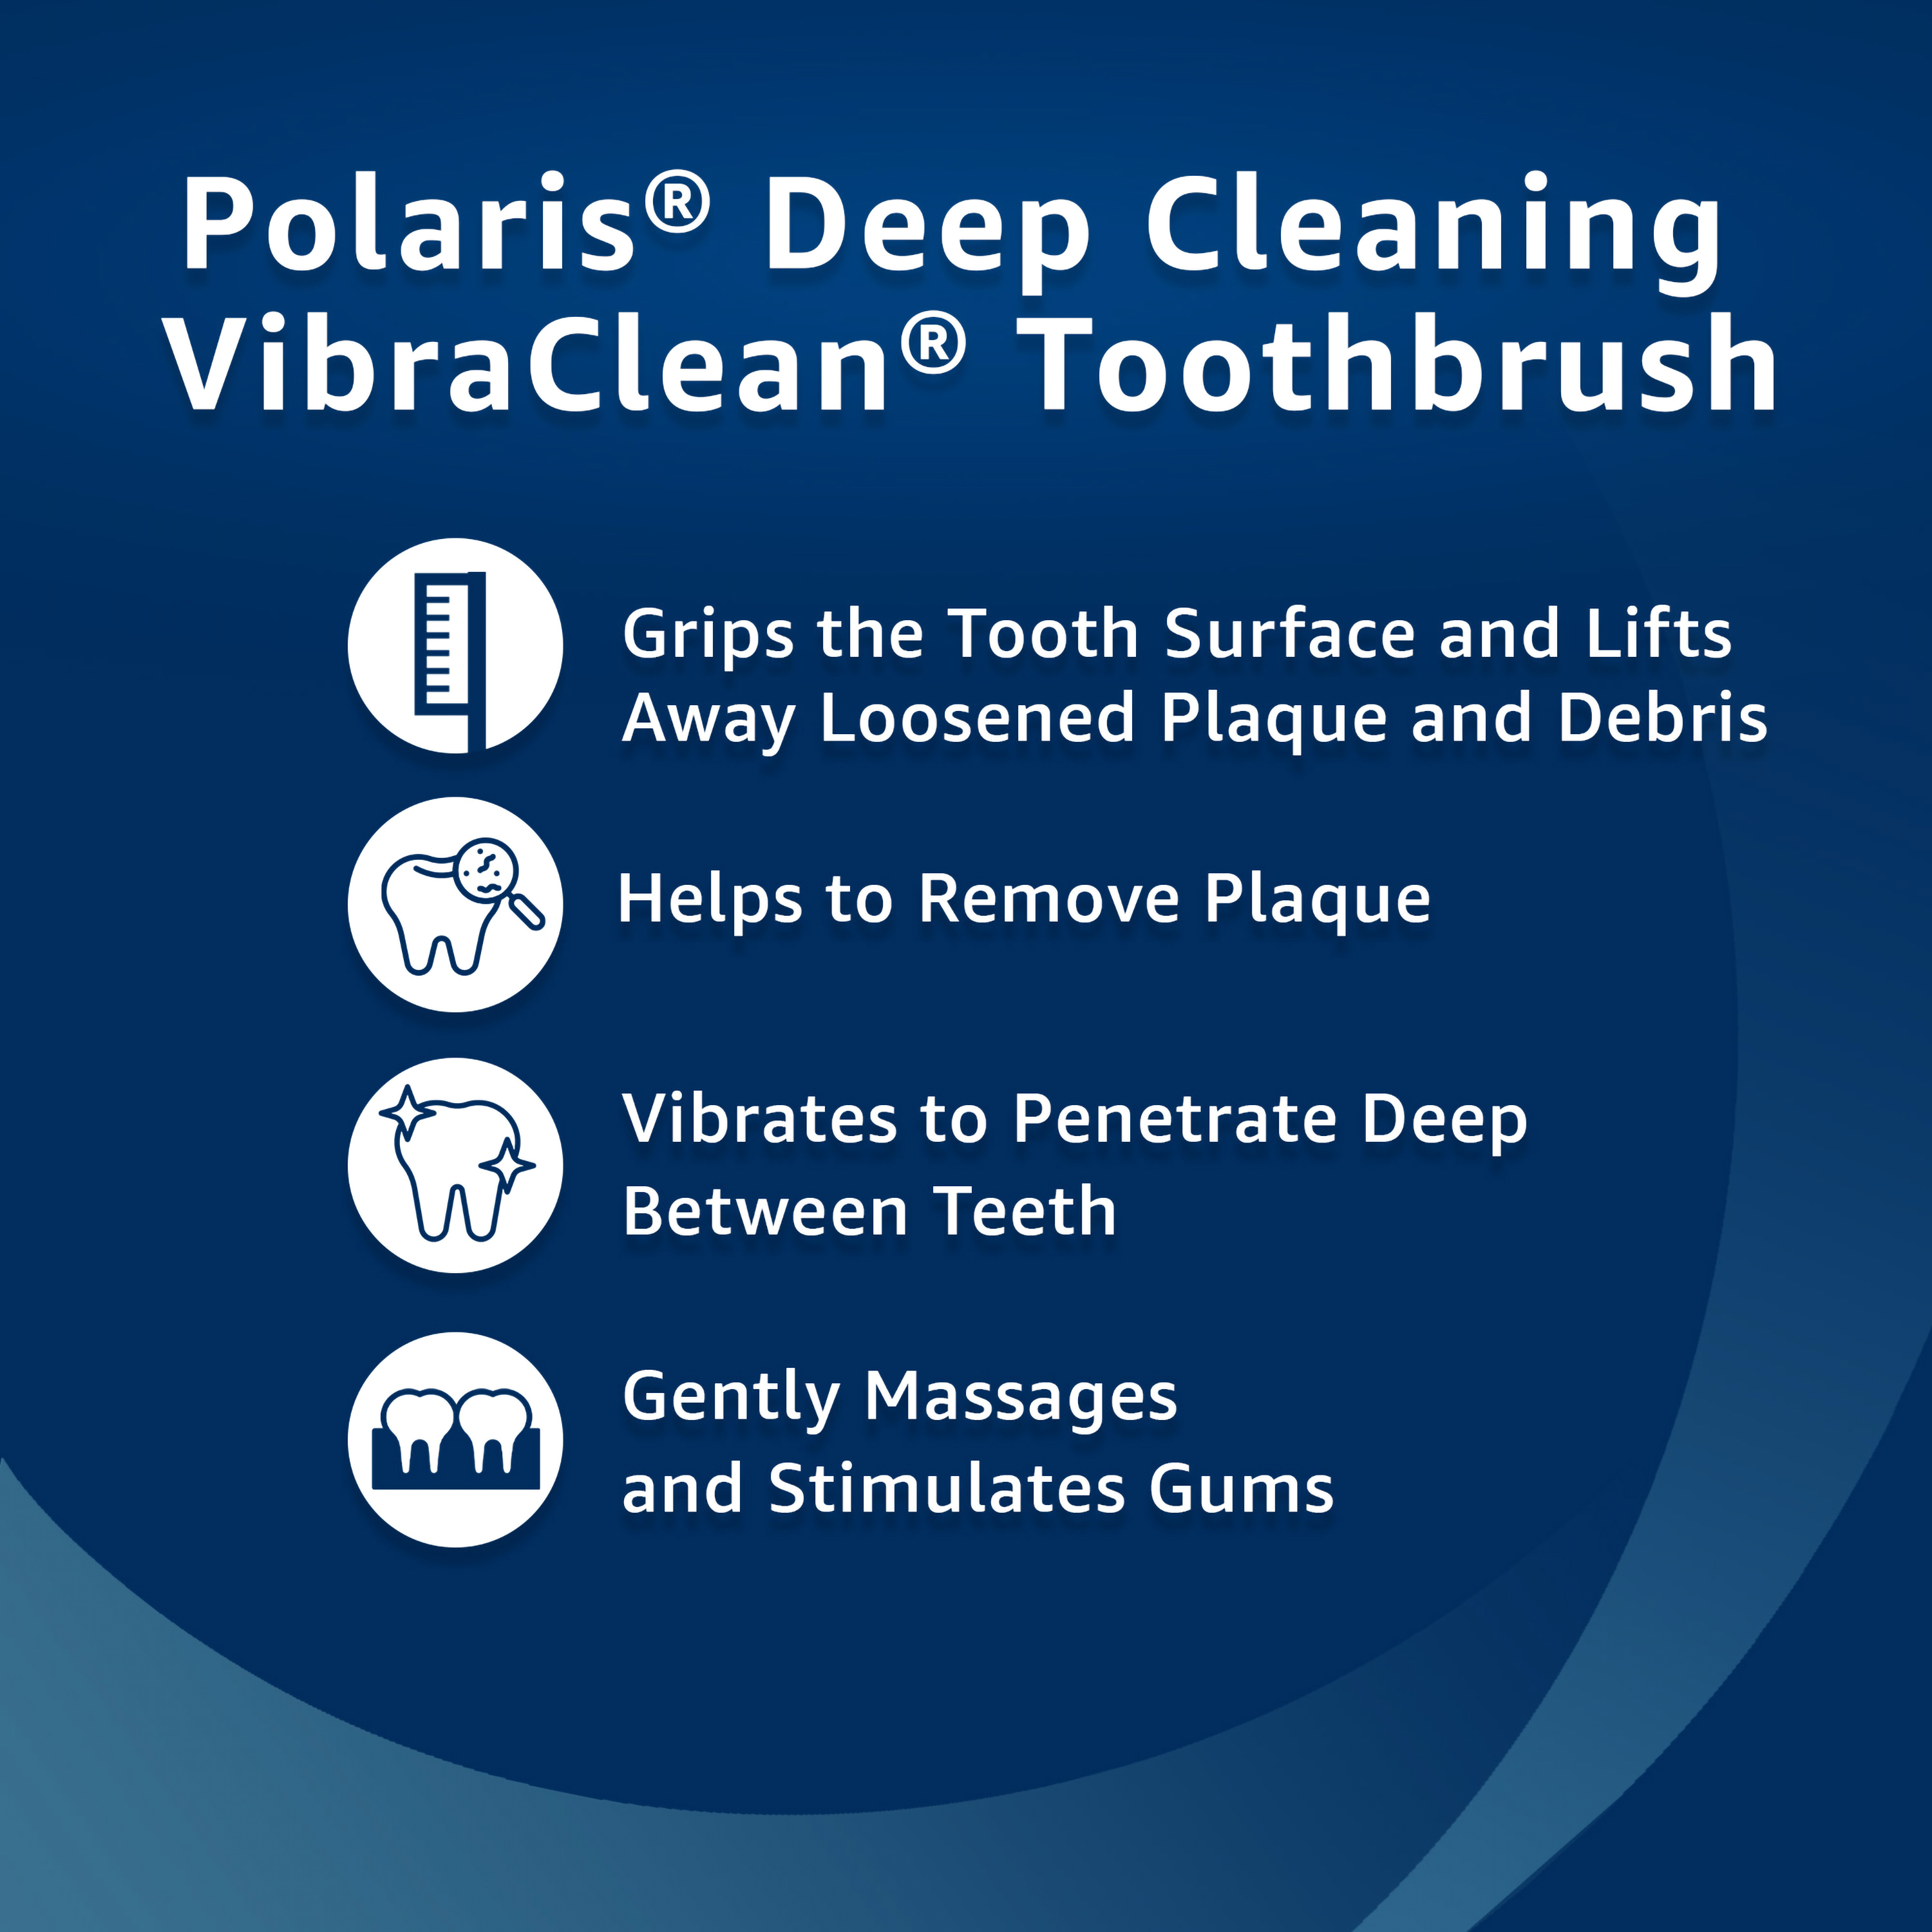 Equate Polaris Deep Cleaning VibraClean Toothbrush, Deep Cleaning Soft Bristles, Helps Remove Plaque, 2 Count - image 4 of 12